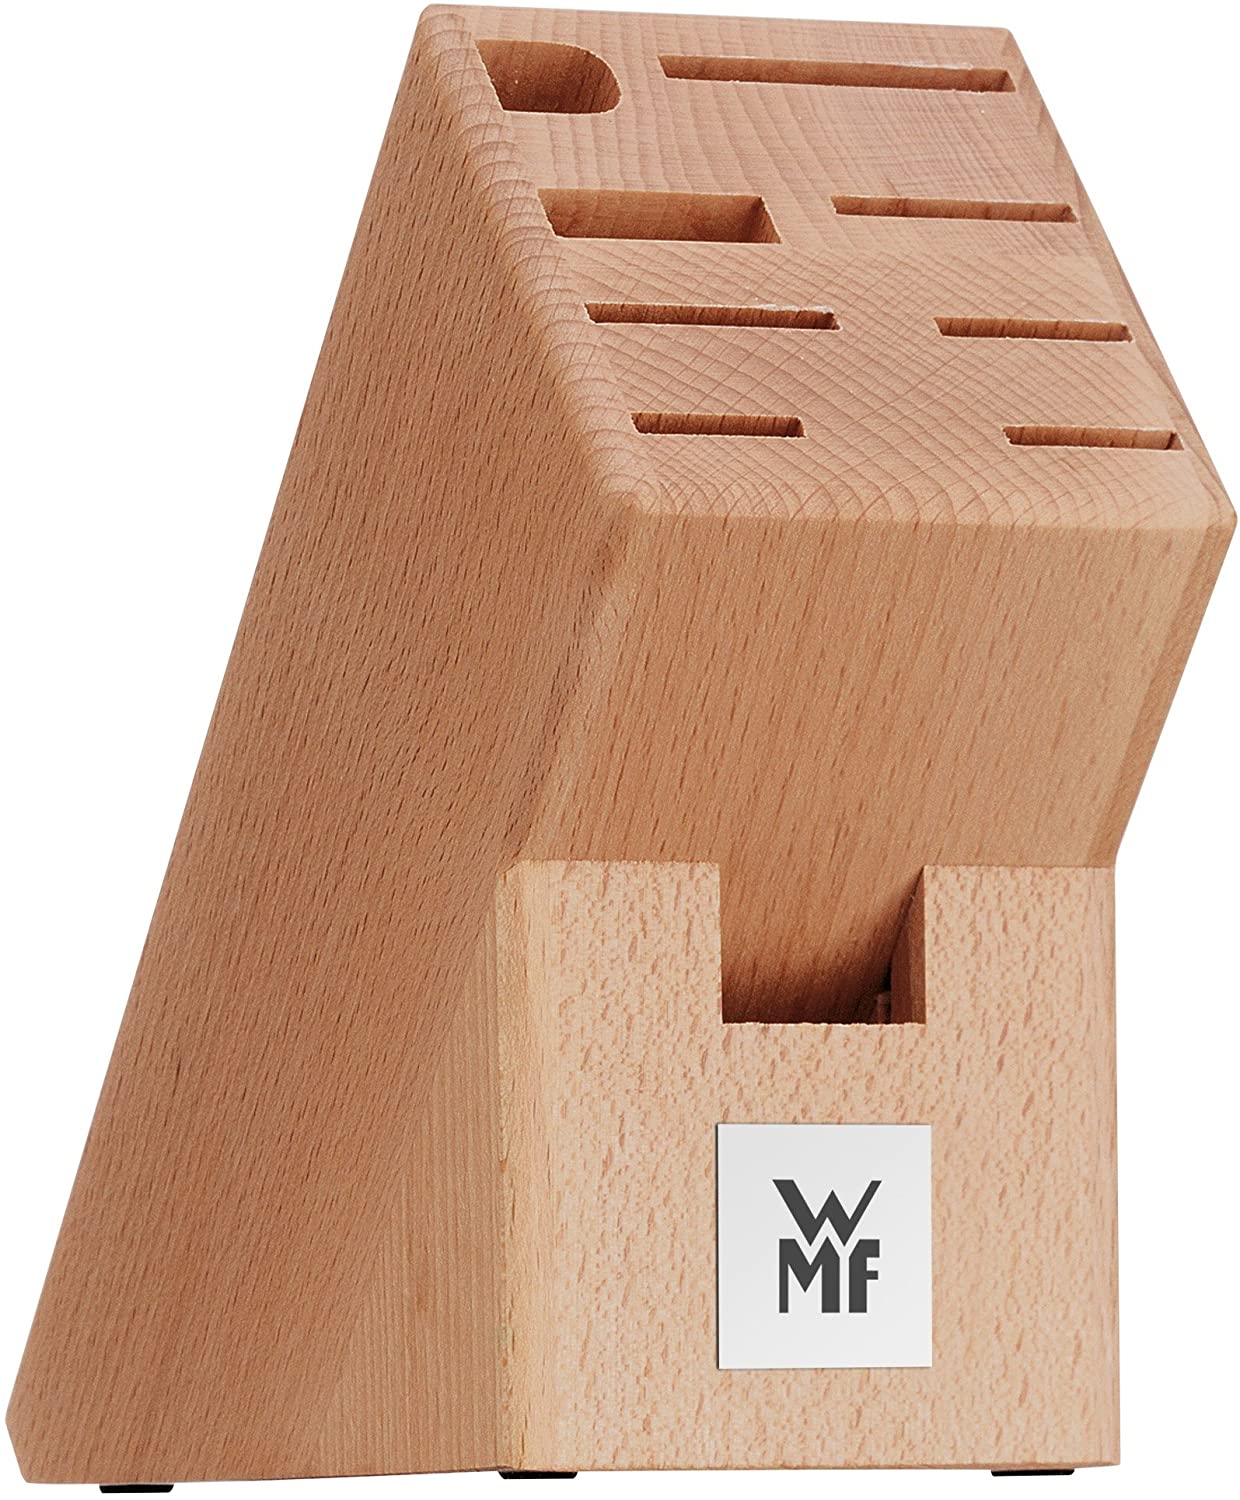 WMF Knife block without knife, untipped, wood, beech wood, empty, for 6 knives, 1 meat fork, 1 sharpening steel, 1 pair of scissors